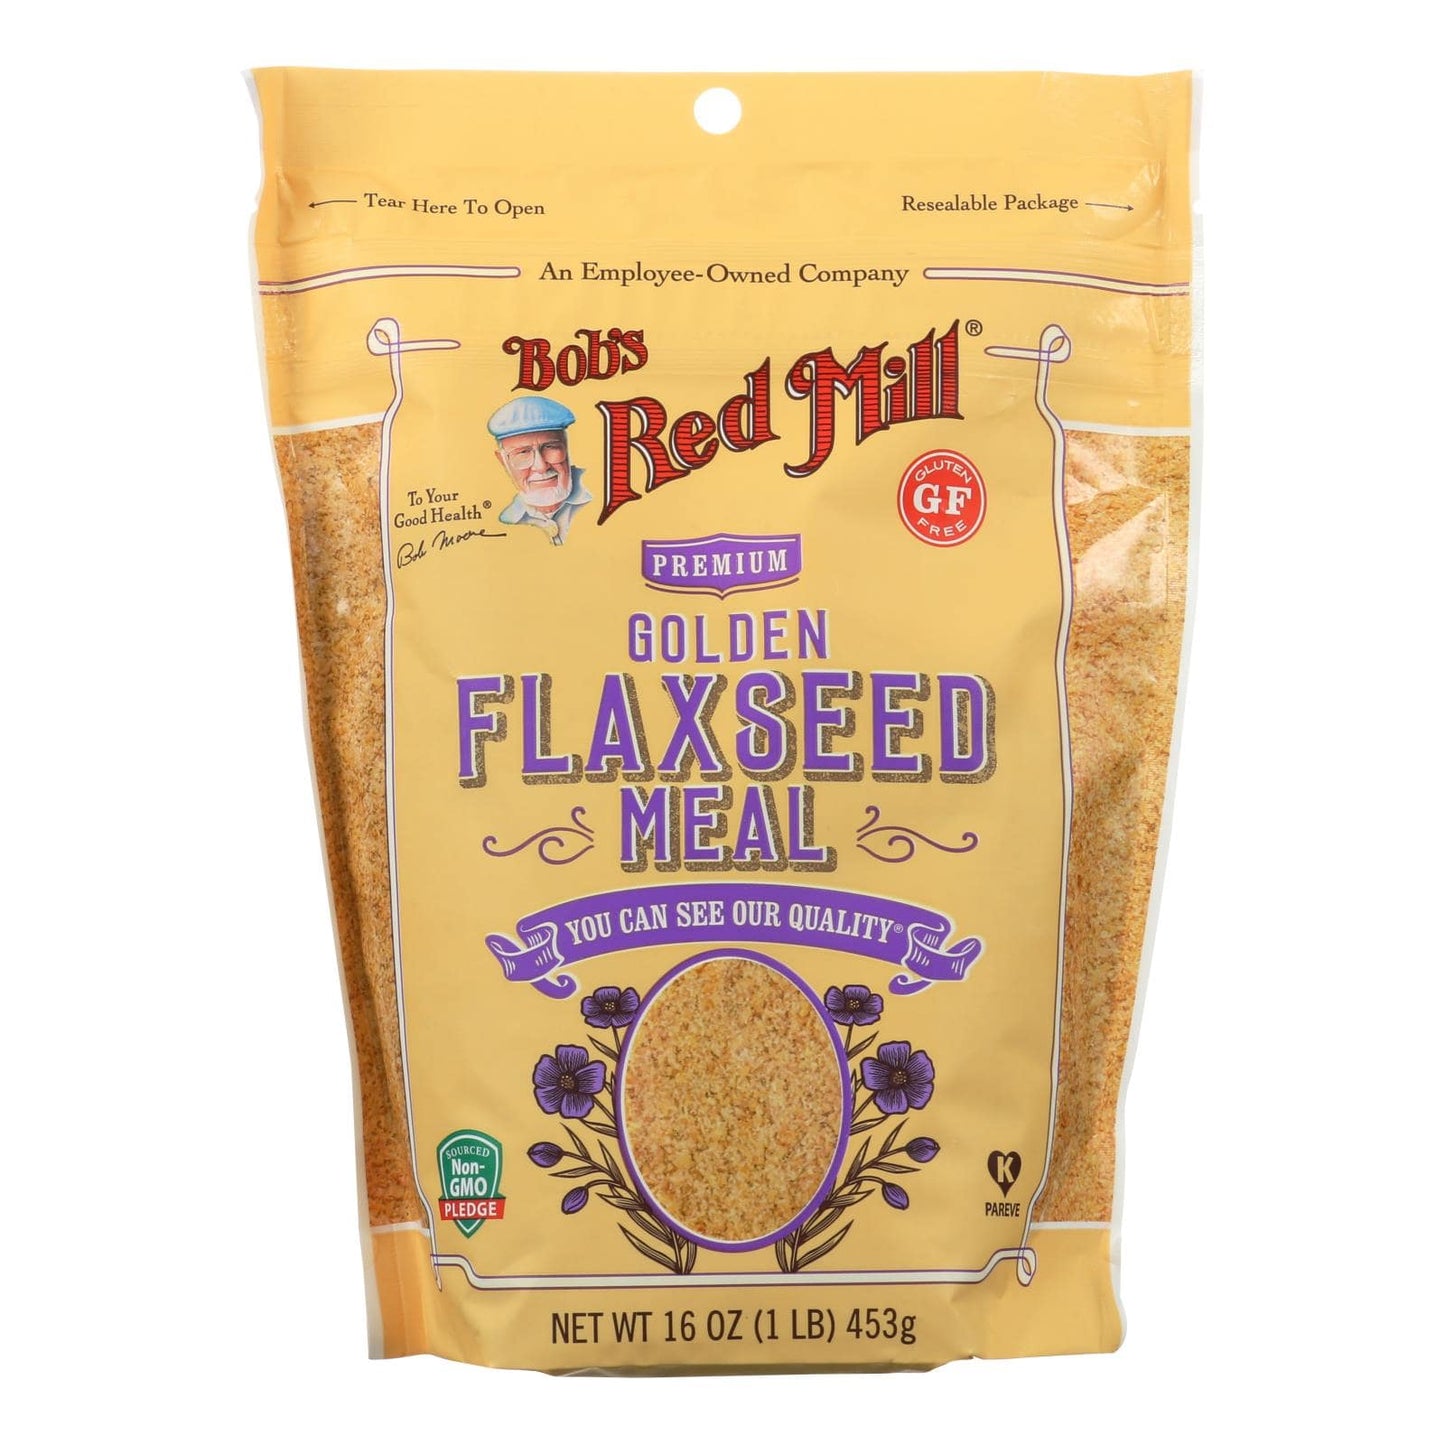 Bob's Red Mill - Flaxseed Meal - Golden - Case Of 4 - 16 Oz | OnlyNaturals.us